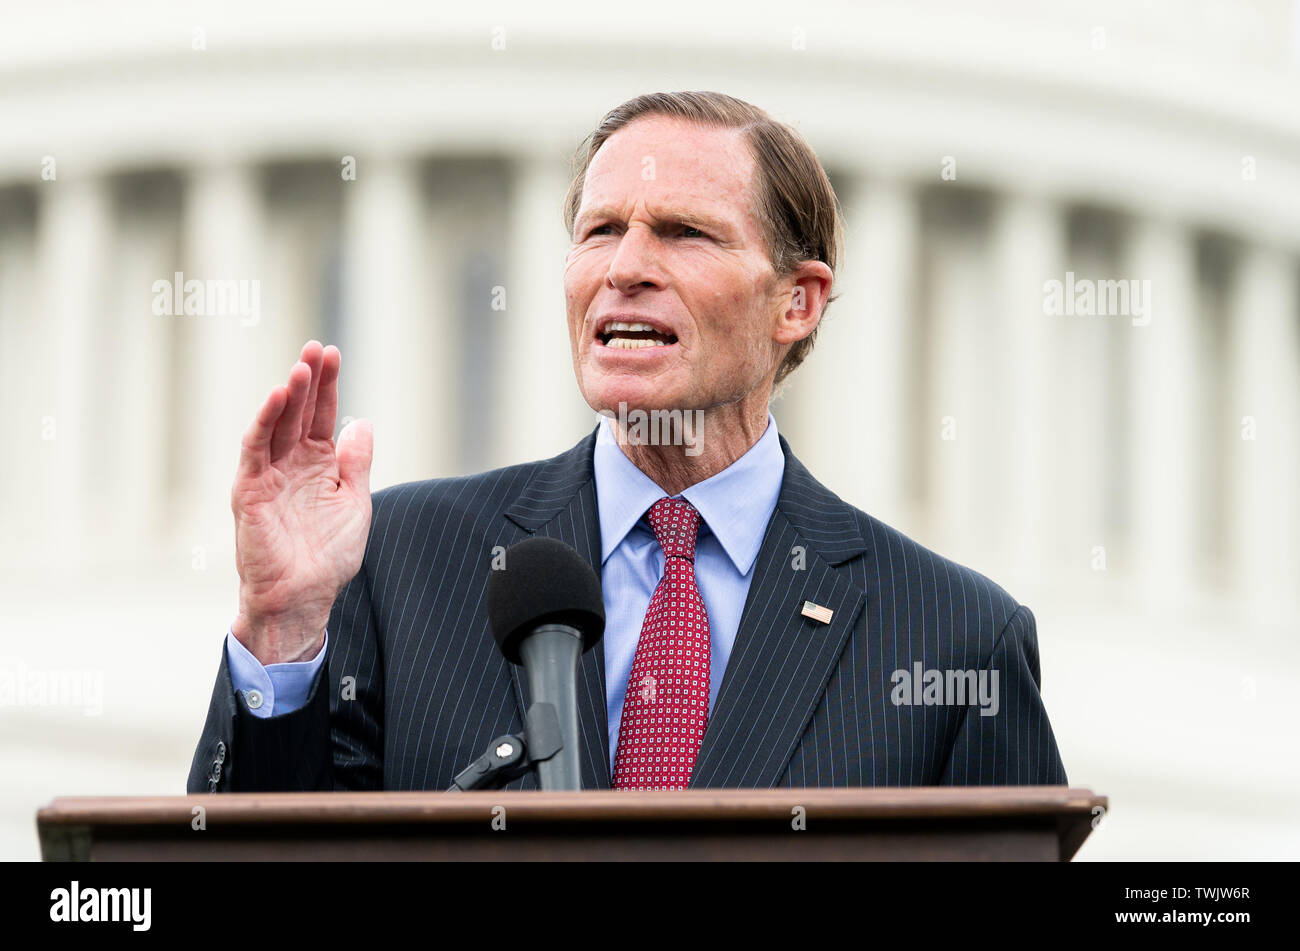 Washington, United States. 20th June, 2019. U.S. Senator Richard Blumenthal (D-CT) speaks during the event in front of the Capitol to urge the passage of the H.R. 8 universal (gun ownership) background checks legislation. Event was held at the grass on the eastern side of the U.S. Capitol in Washington, DC. Credit: SOPA Images Limited/Alamy Live News Stock Photo